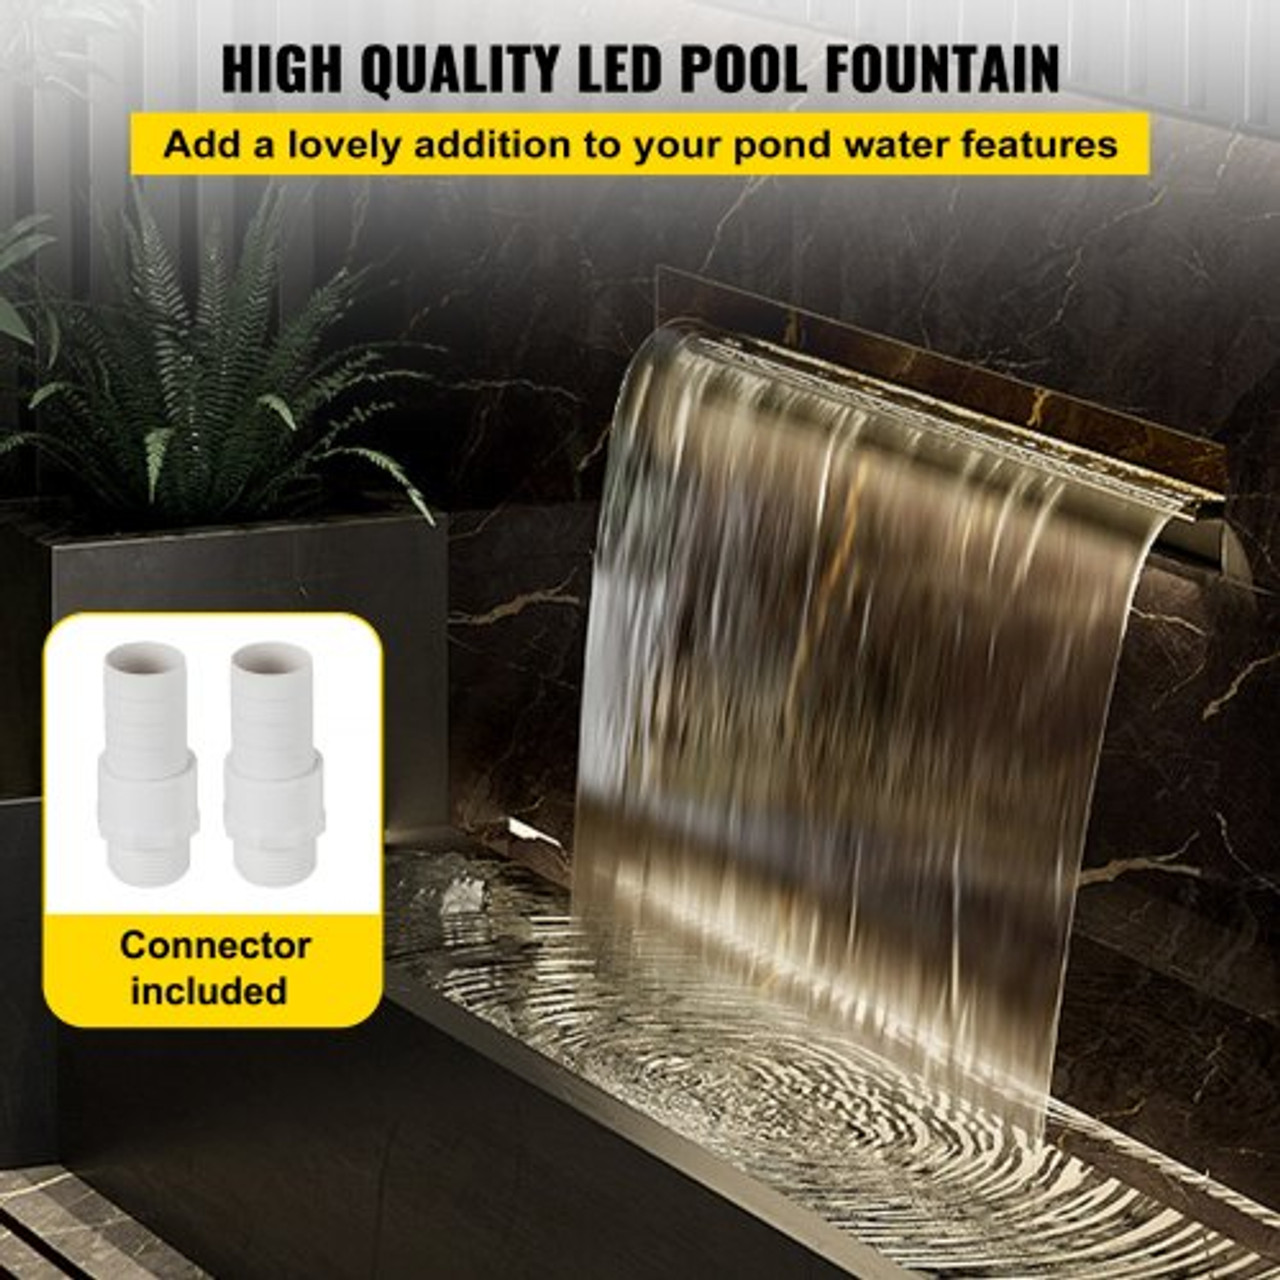 Pool Fountain Stainless Steel, Pool Waterfall 23.6" x 4.5" x 3.1"(W x D x H) with LED Strip Light, Waterfall Spillway Rectangular Garden Outdoor